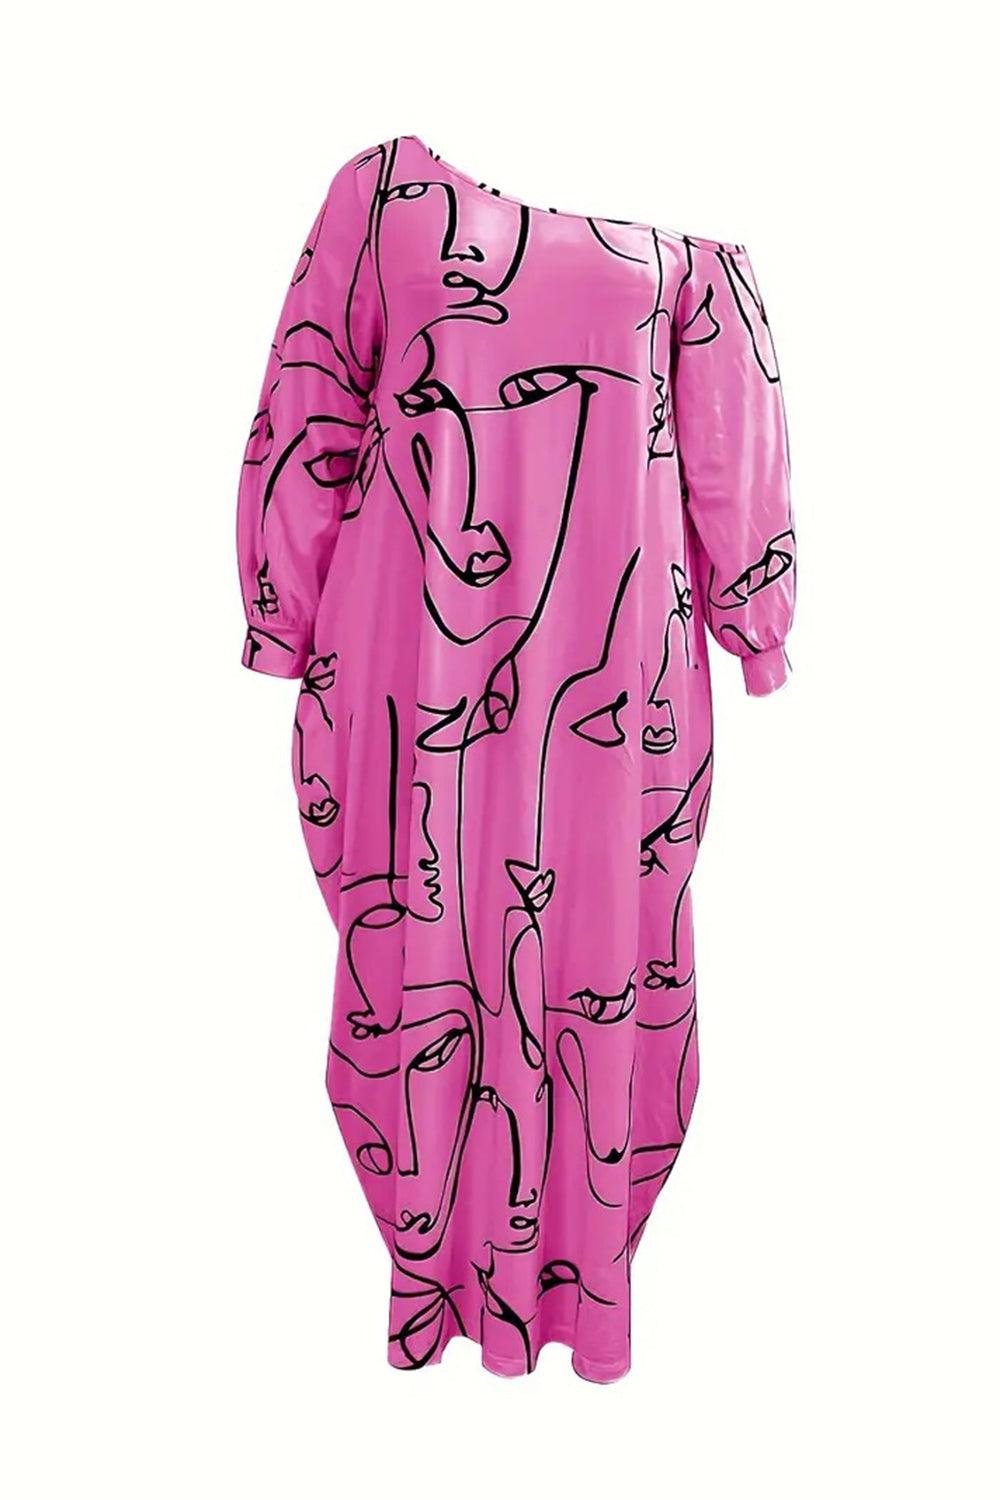 a pink dress with black and white drawings on it